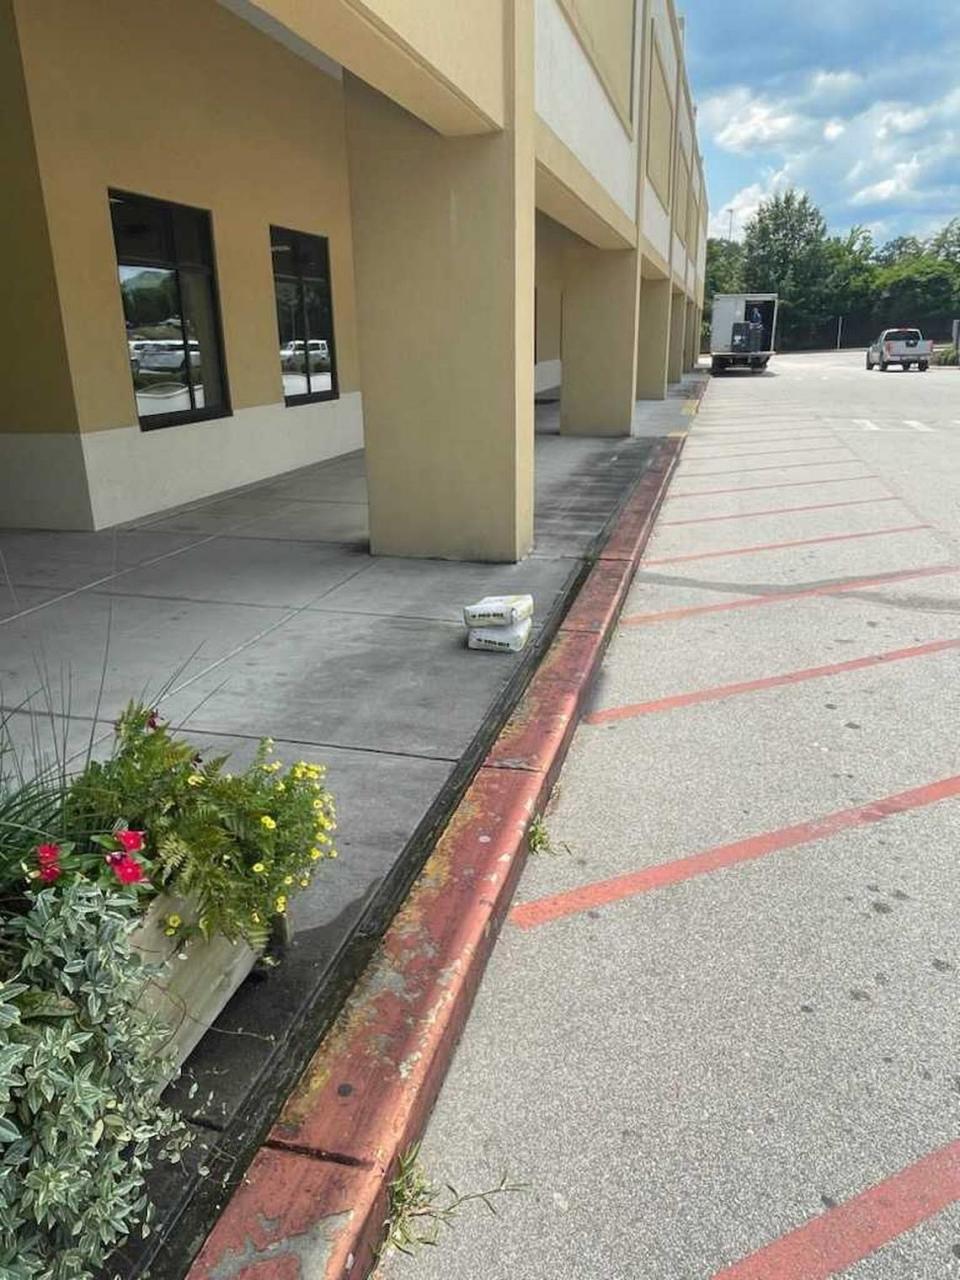 Two concrete bags lay outside the Lexington County Auxiliary Administration Building, courtesy of Attorney Robert Goings. Courtesy The Goings Law Firm